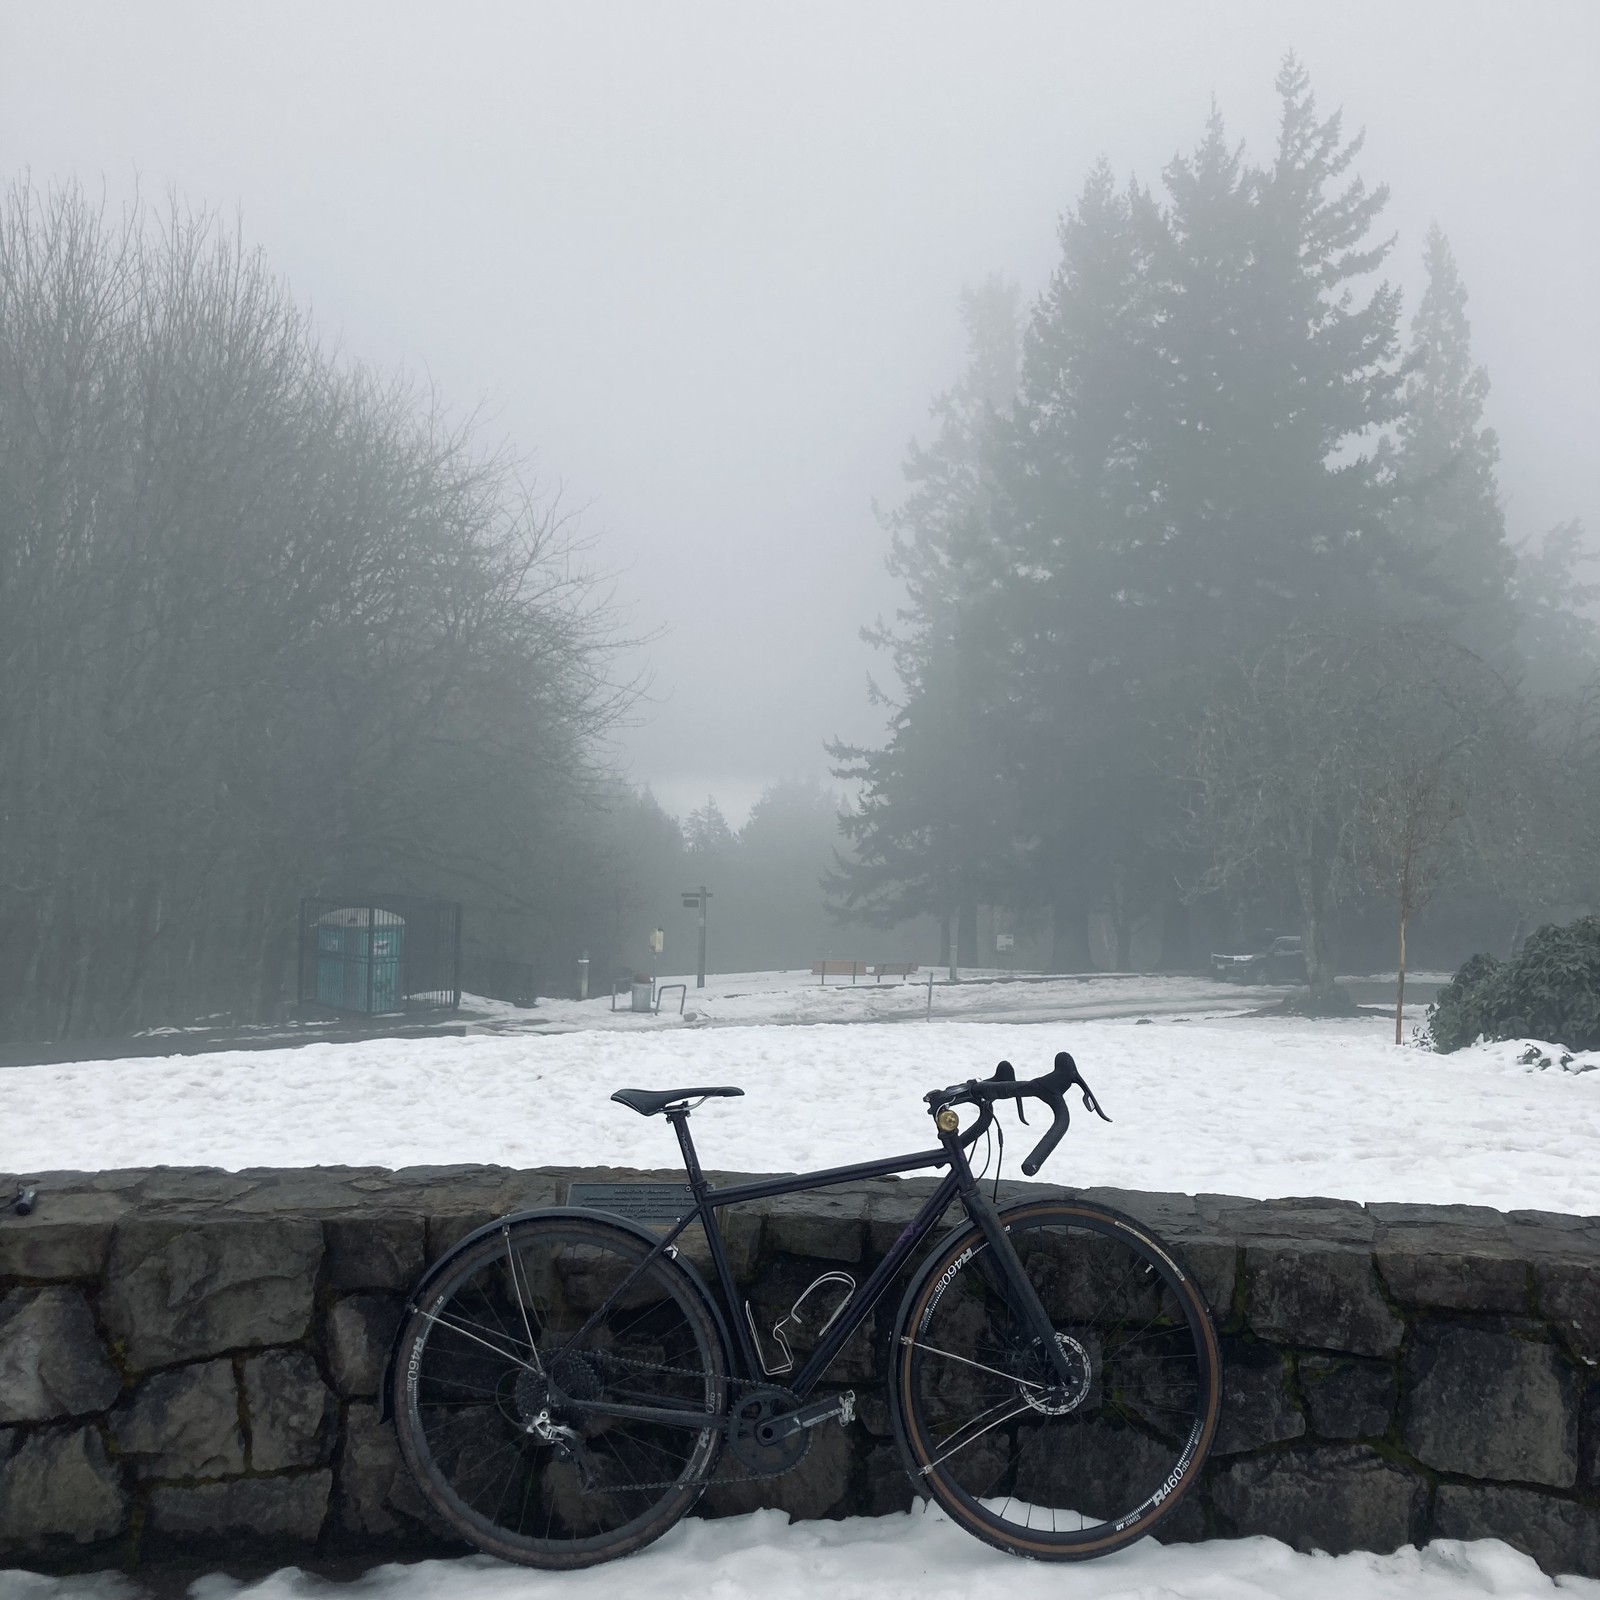 View from Council Crest Park in the direction of Mt. Hood, which is not visible. Week-old icy snow, well-churned by thousands of footsteps, blankets the ground. A cold heavy mist hangs in the air — the inside of a dark cloud clinging to the hilltop. In the foreground, a bicycle leans against a low decorative stone wall. A stand of tall Douglas fir trees about 100' away looms in the mist.